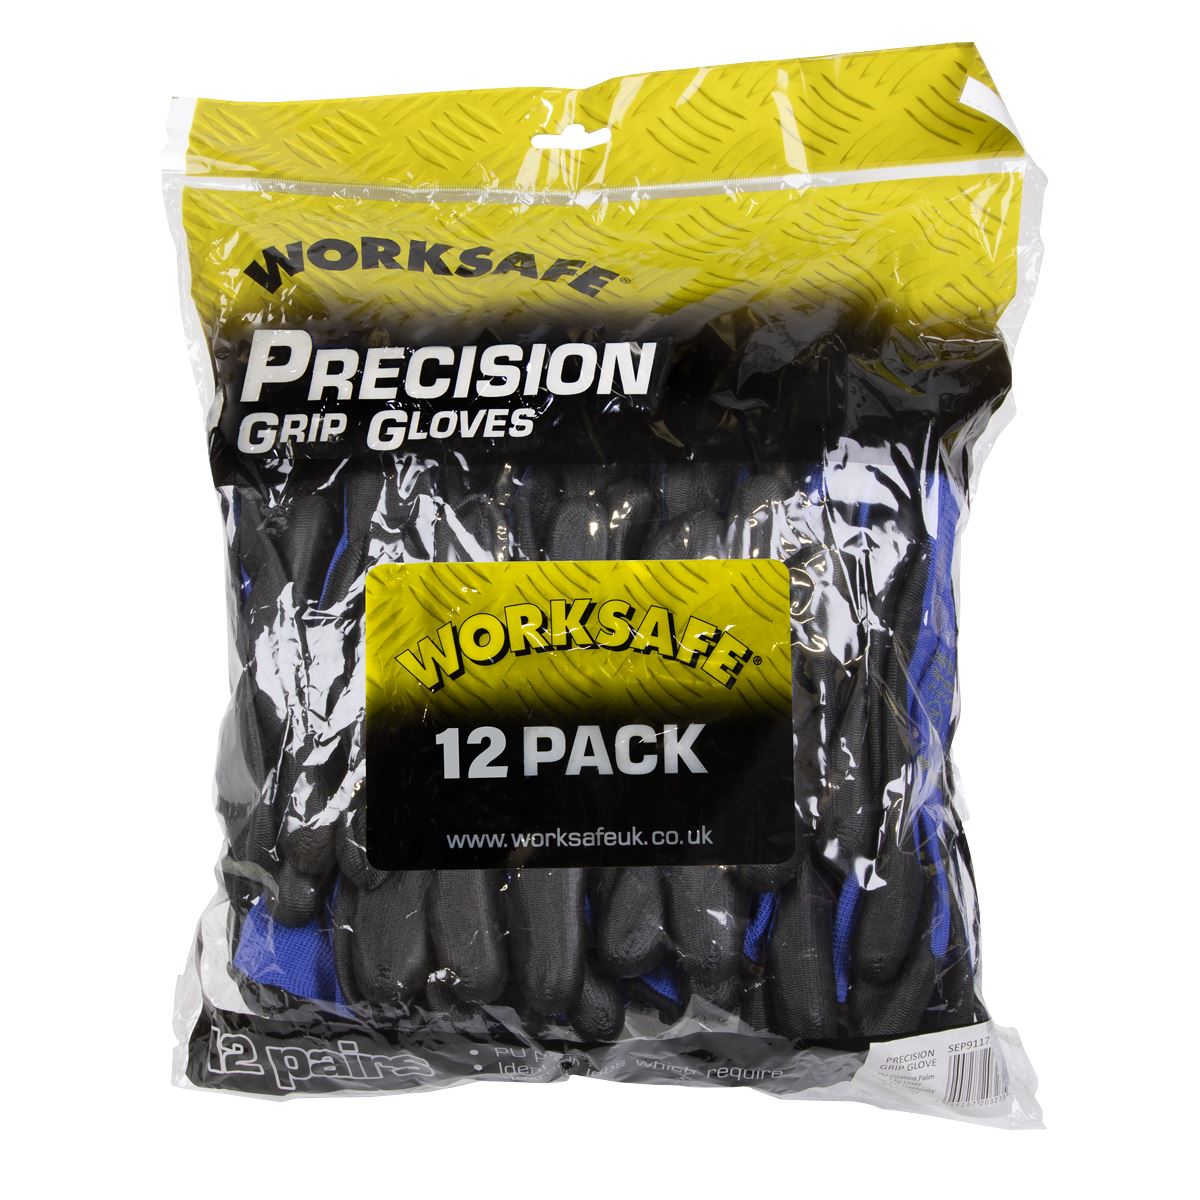 Worksafe by Sealey Lightweight Precision Grip Gloves (X-Large) - Pack of 12 Pairs